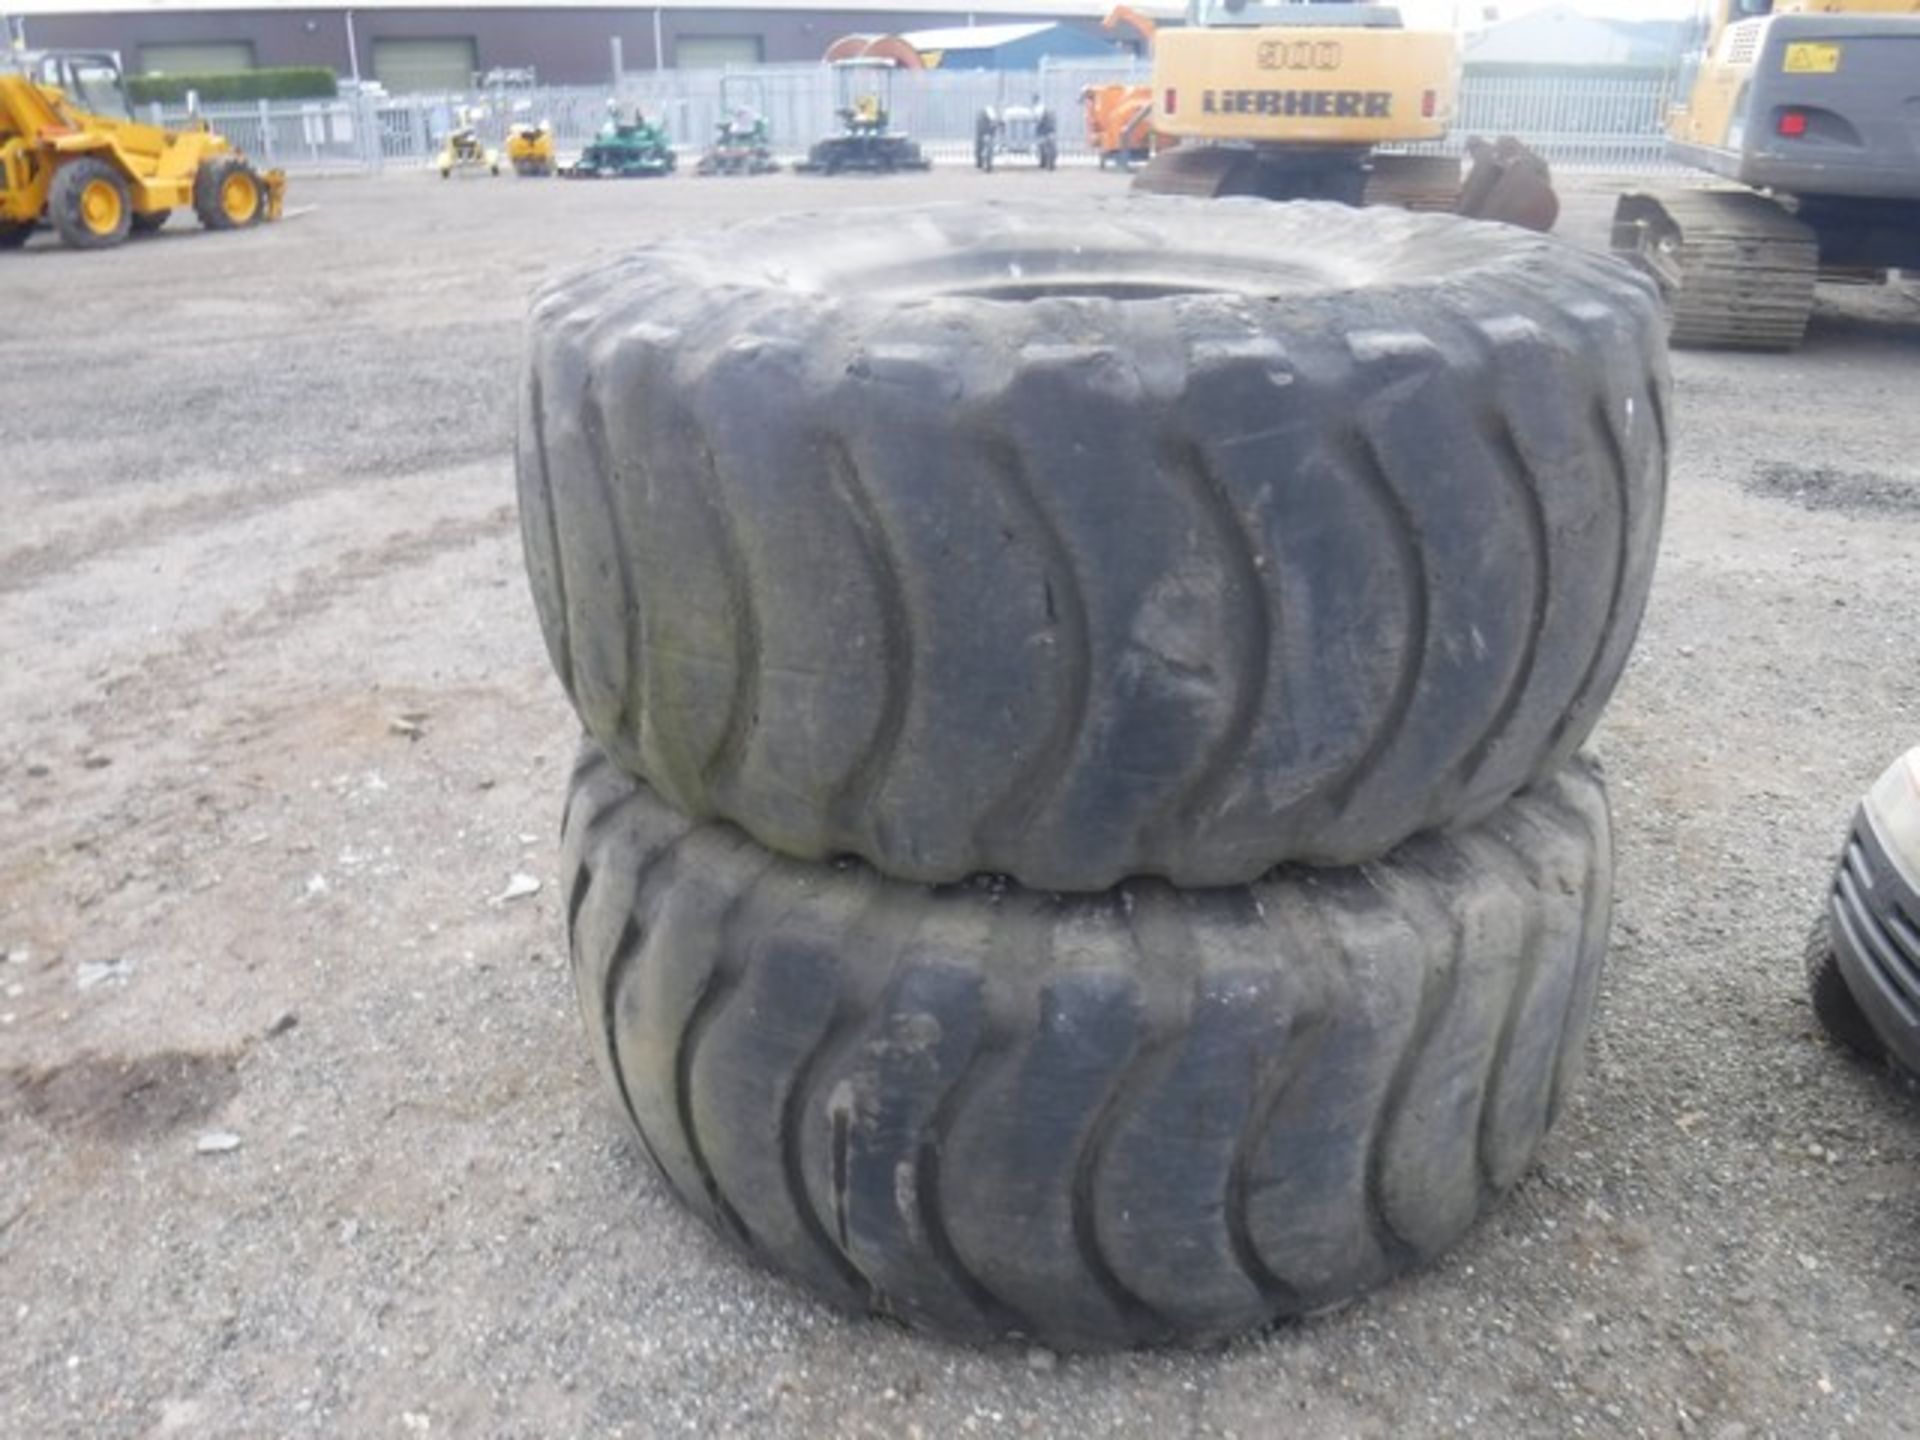 MICHELIN TYRES x2 -- 26.5x25 SUITABLE FOR WHEEL SHOVEL OR SIMILAR - Image 2 of 3